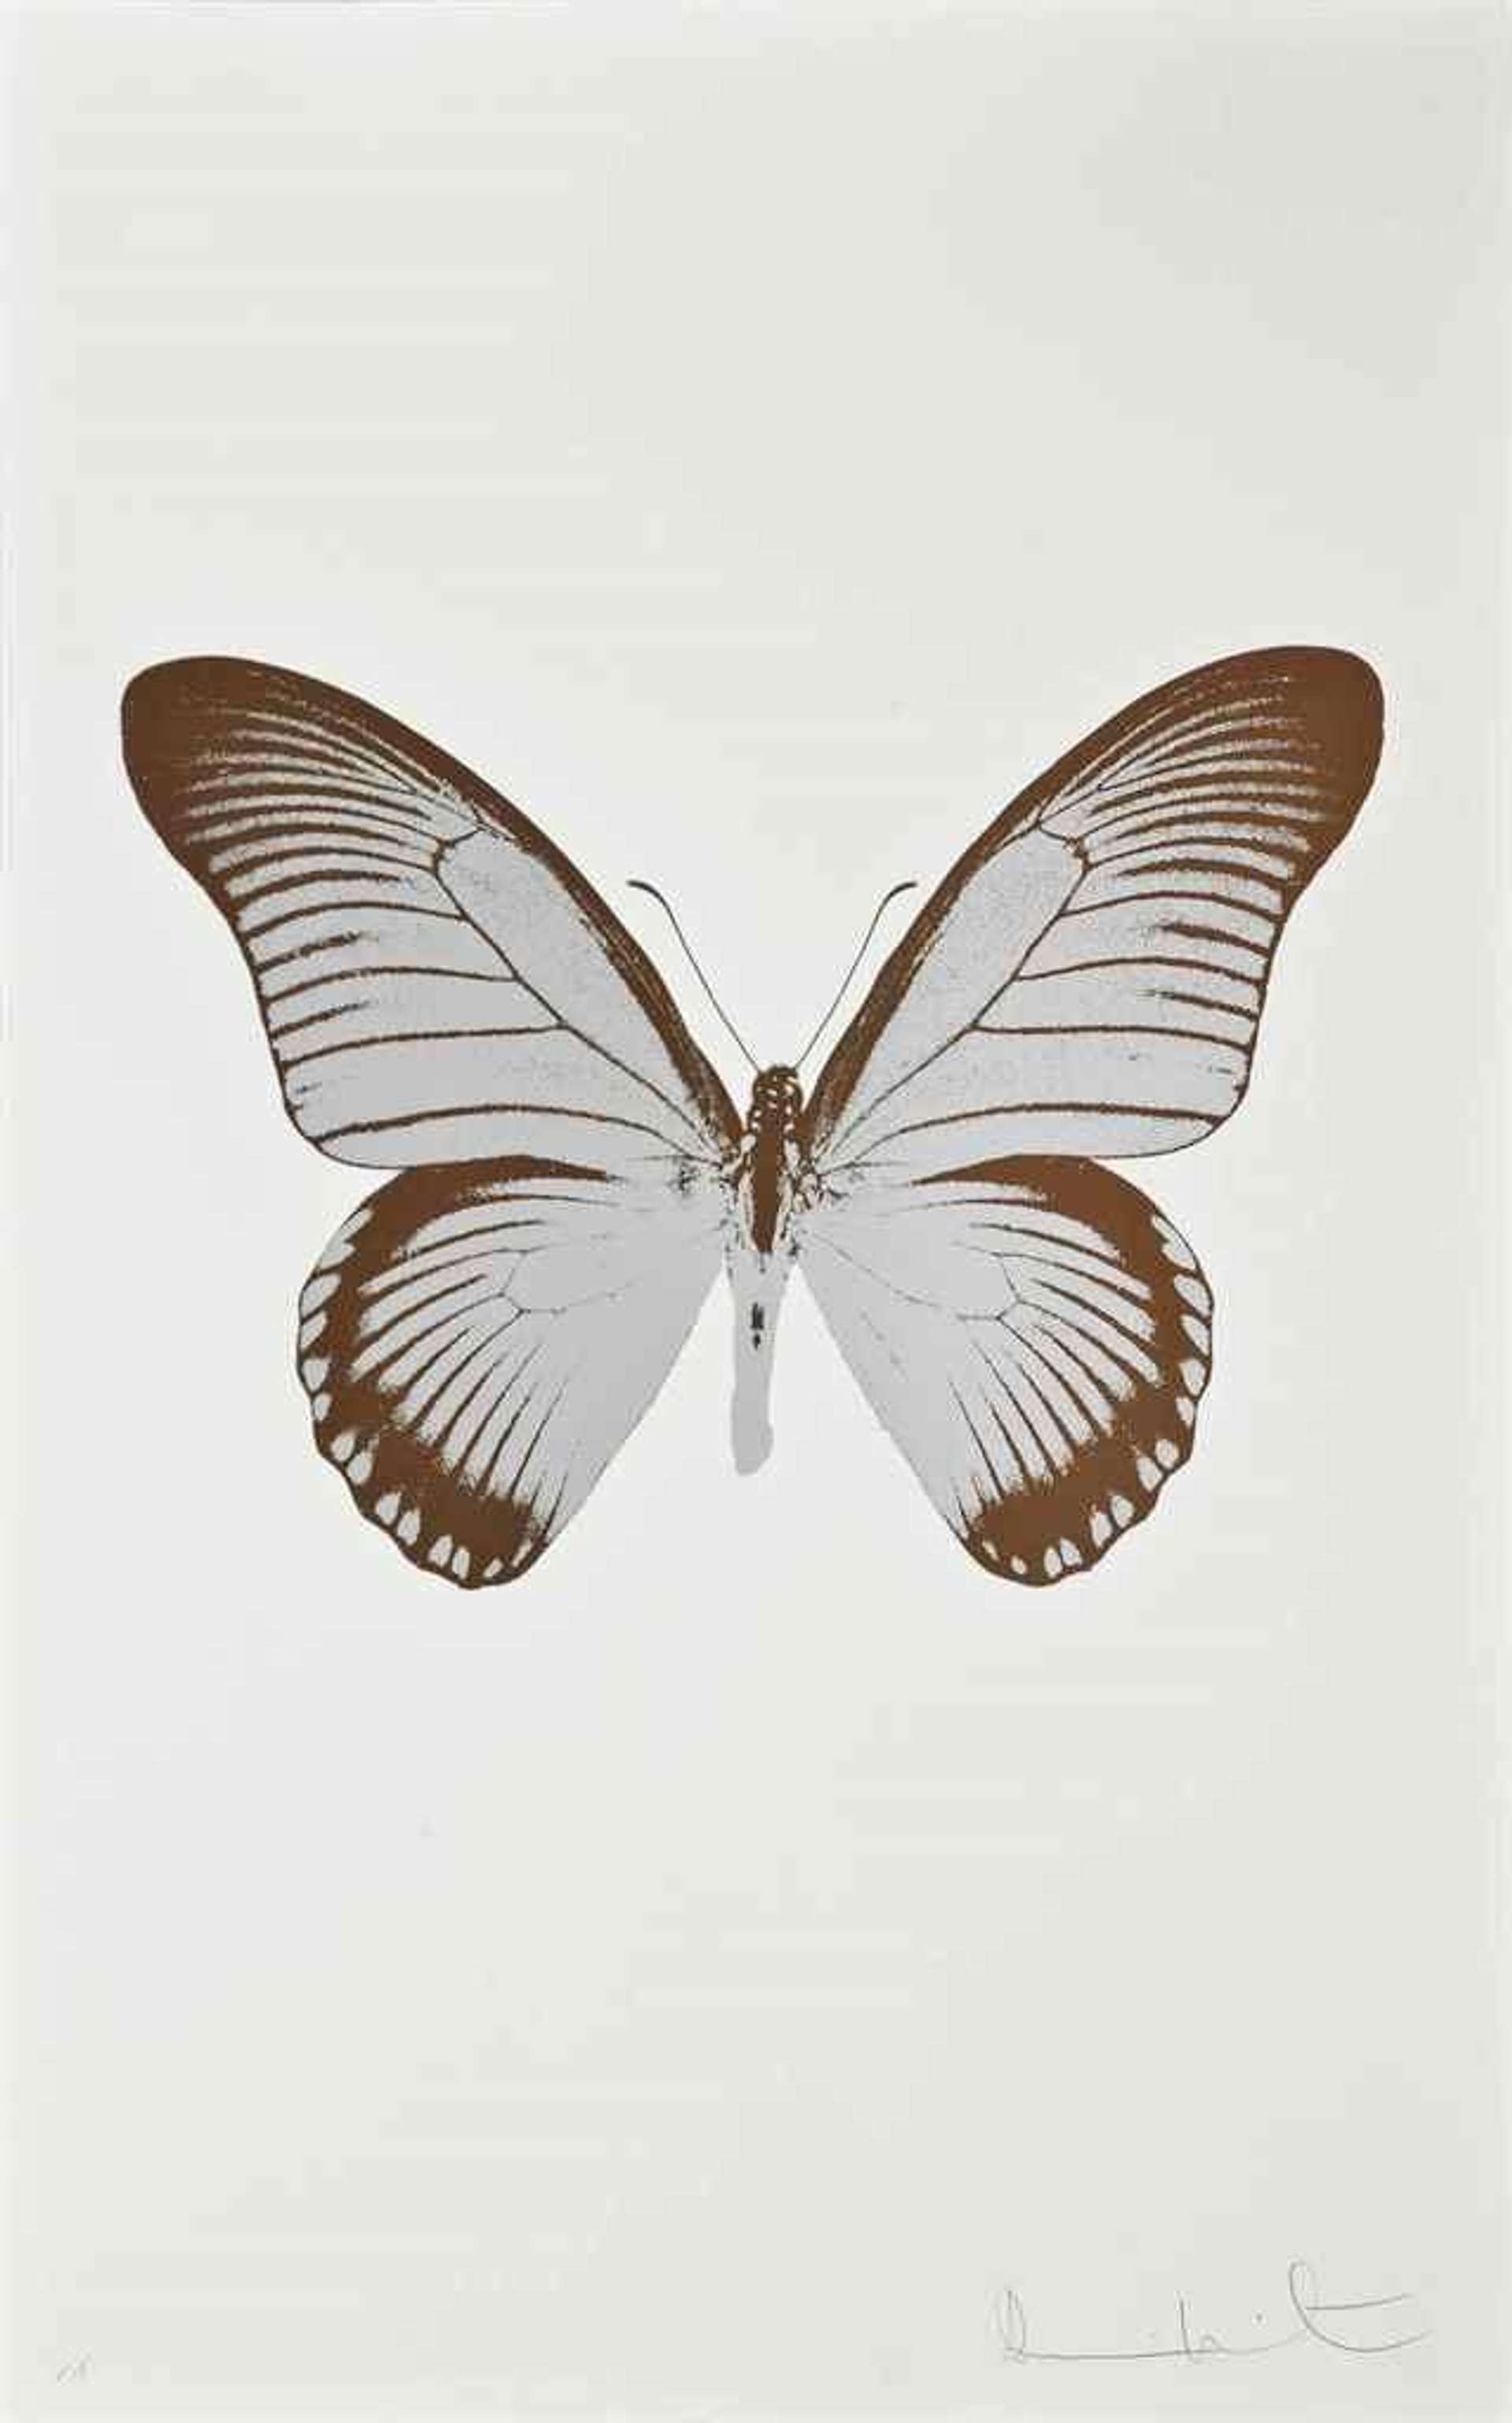 Damien Hirst: The Souls IV (silver gloss, chocolate) - Signed Print